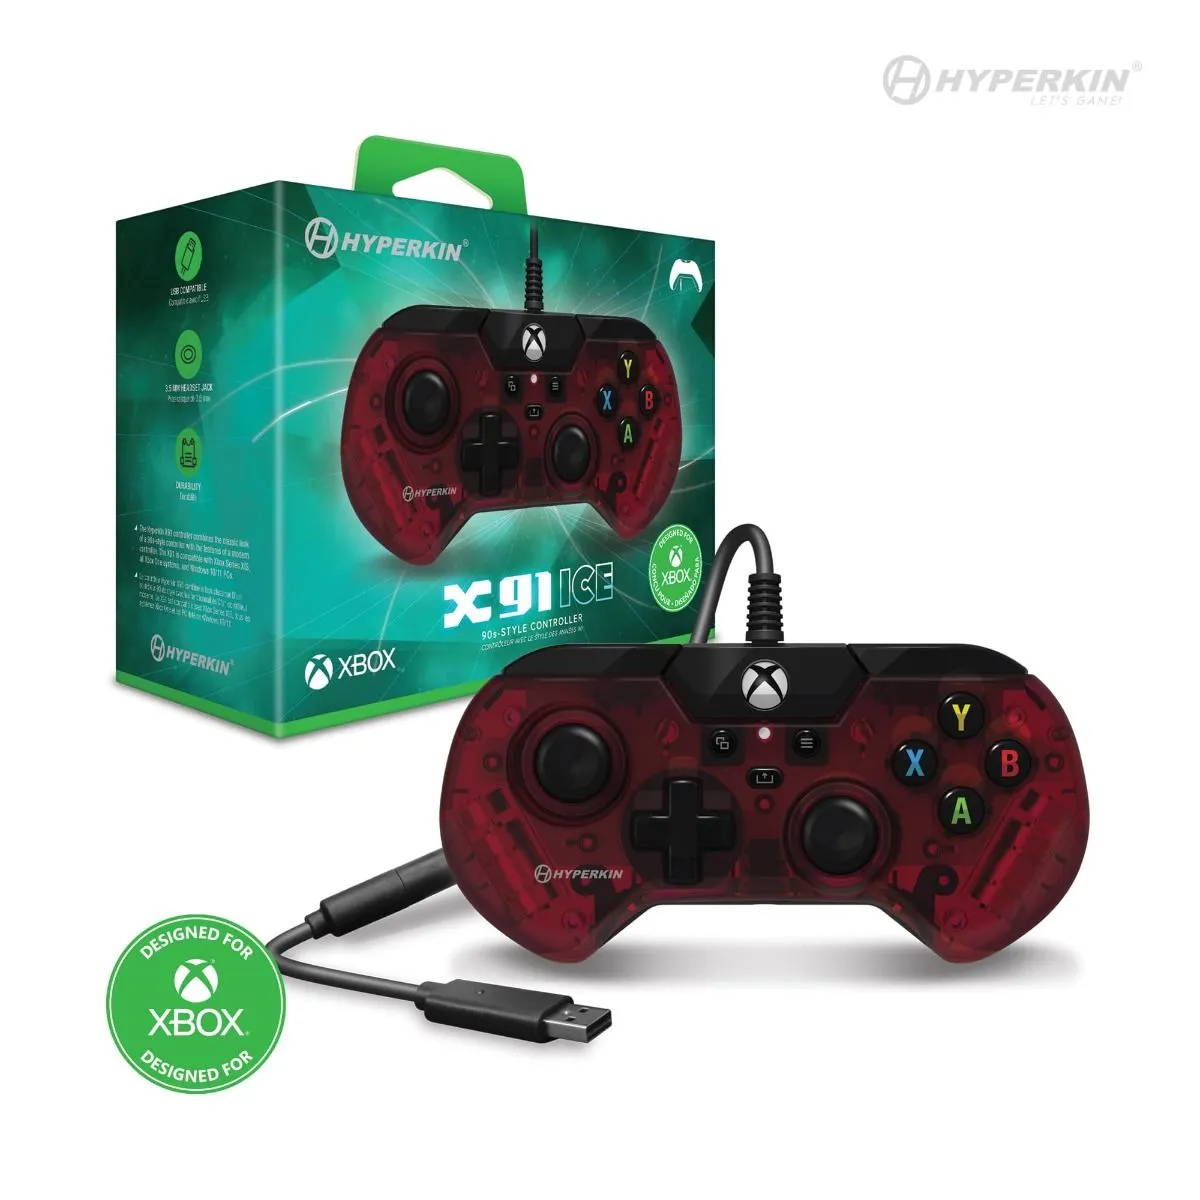 Microsoft Xbox Series X/S Controller in Red with Headset Xbox